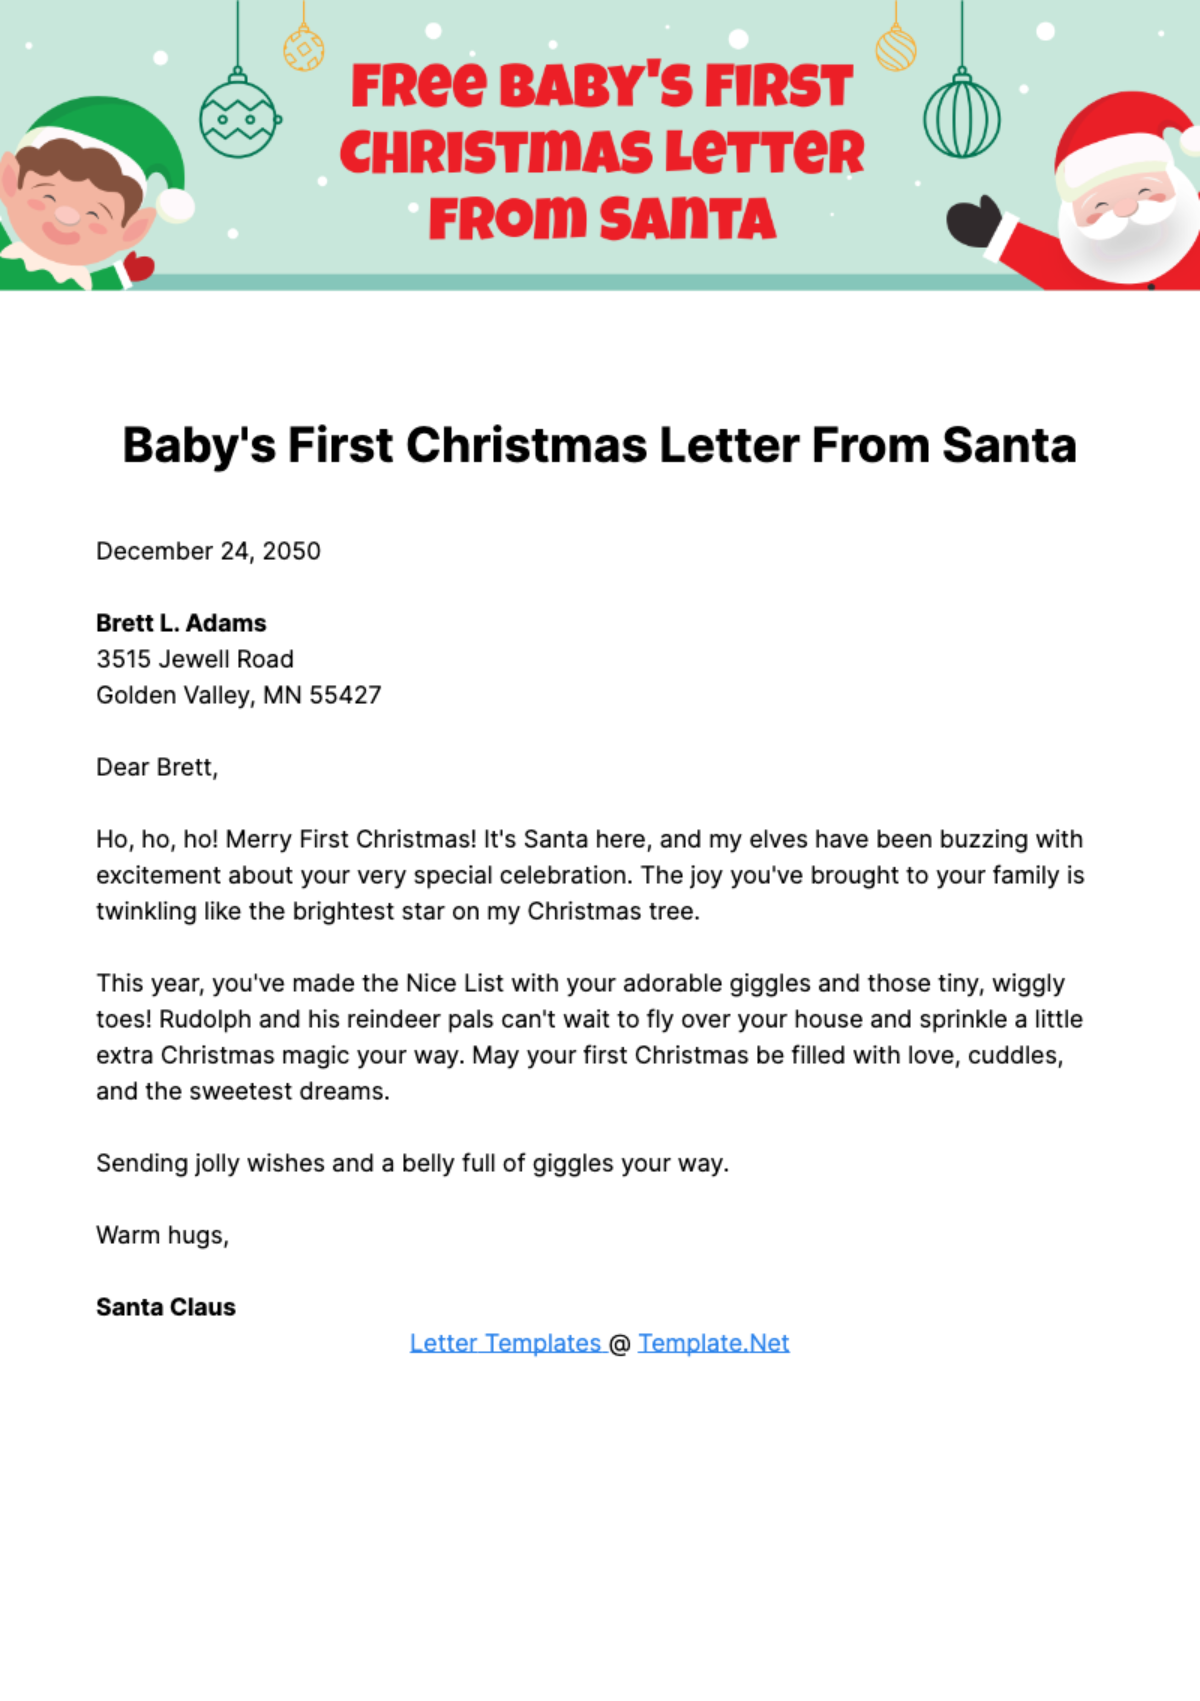 Baby's First Christmas Letter from Santa Template